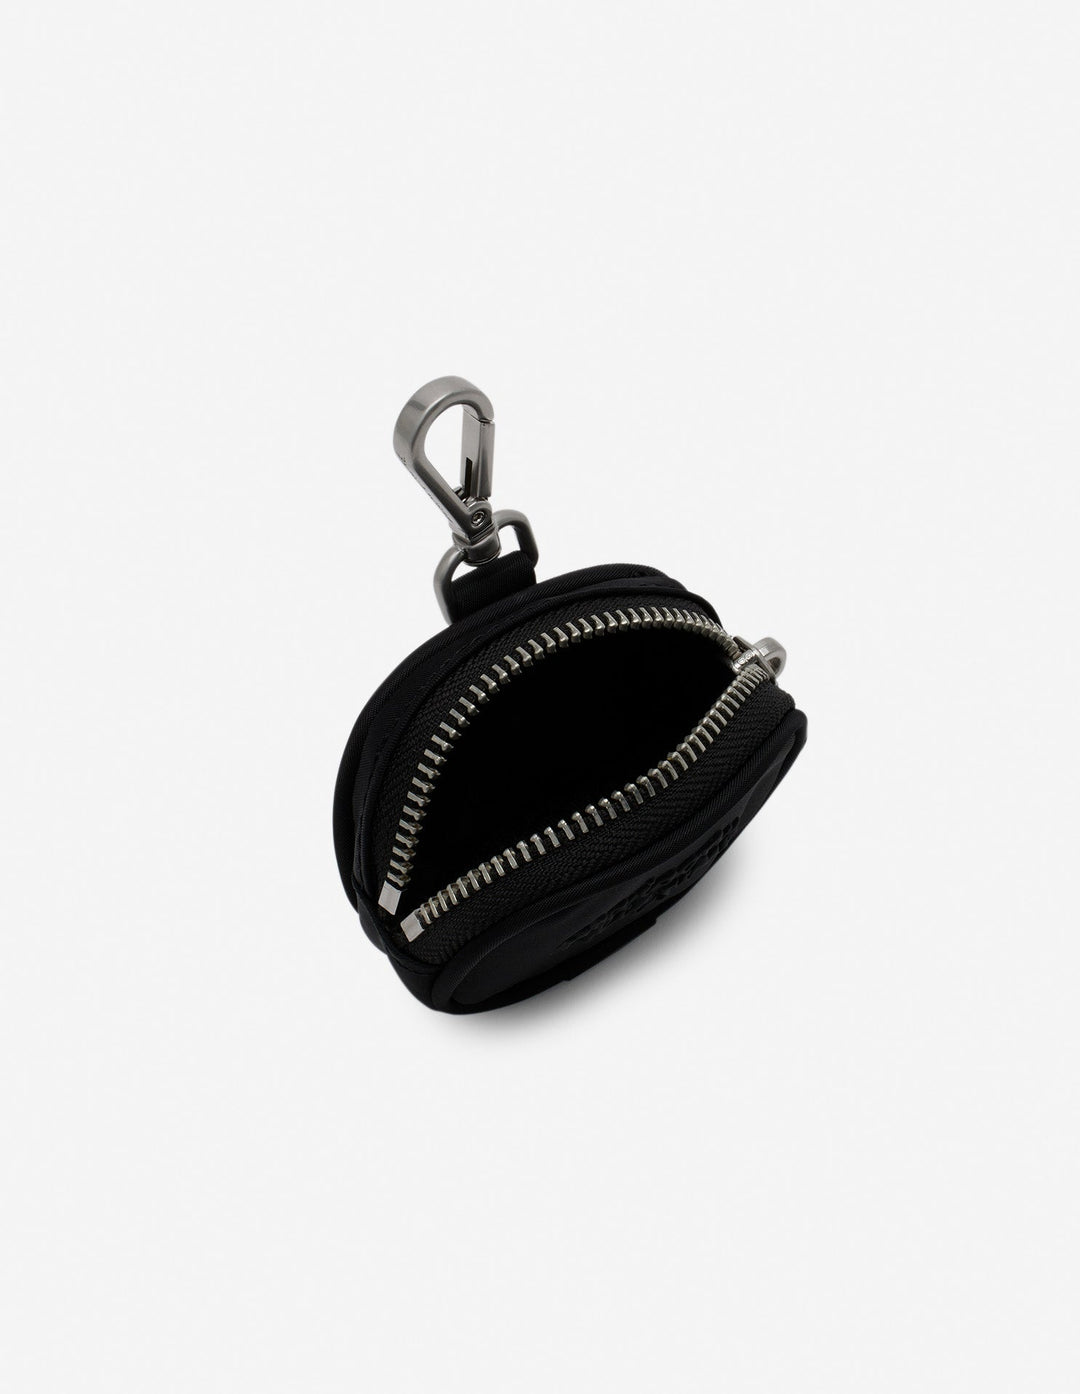 "THE TRAVELLER" EARBUD CASE